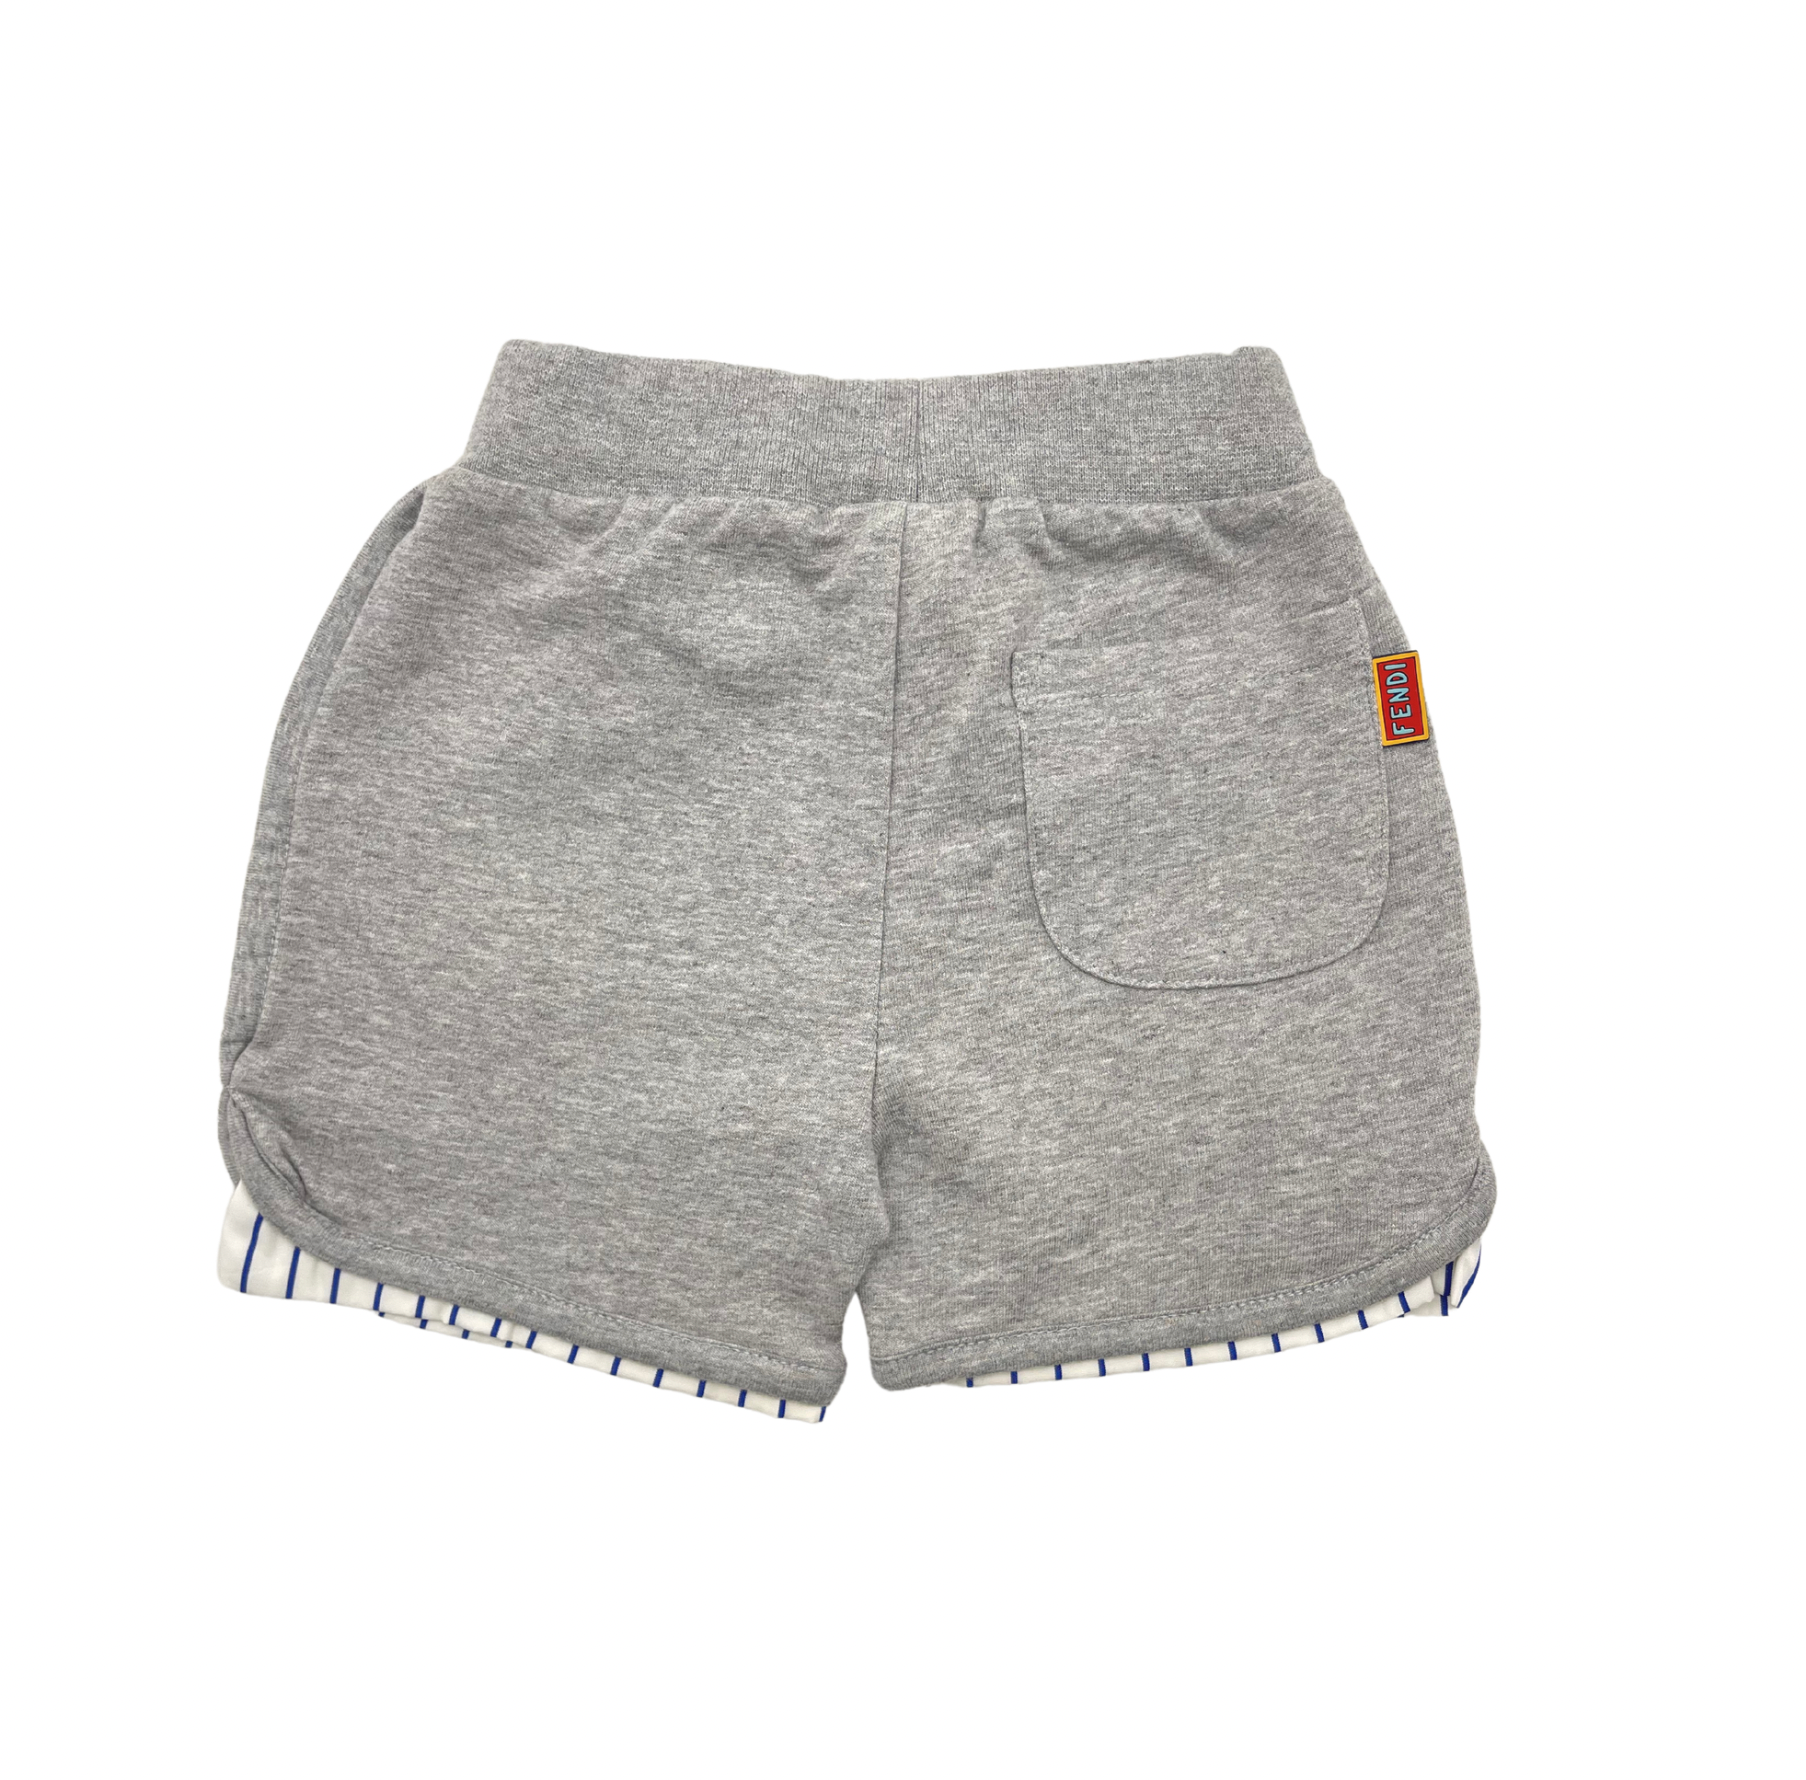 FENDI - Gray shorts with small logo on the back pocket - 6 months